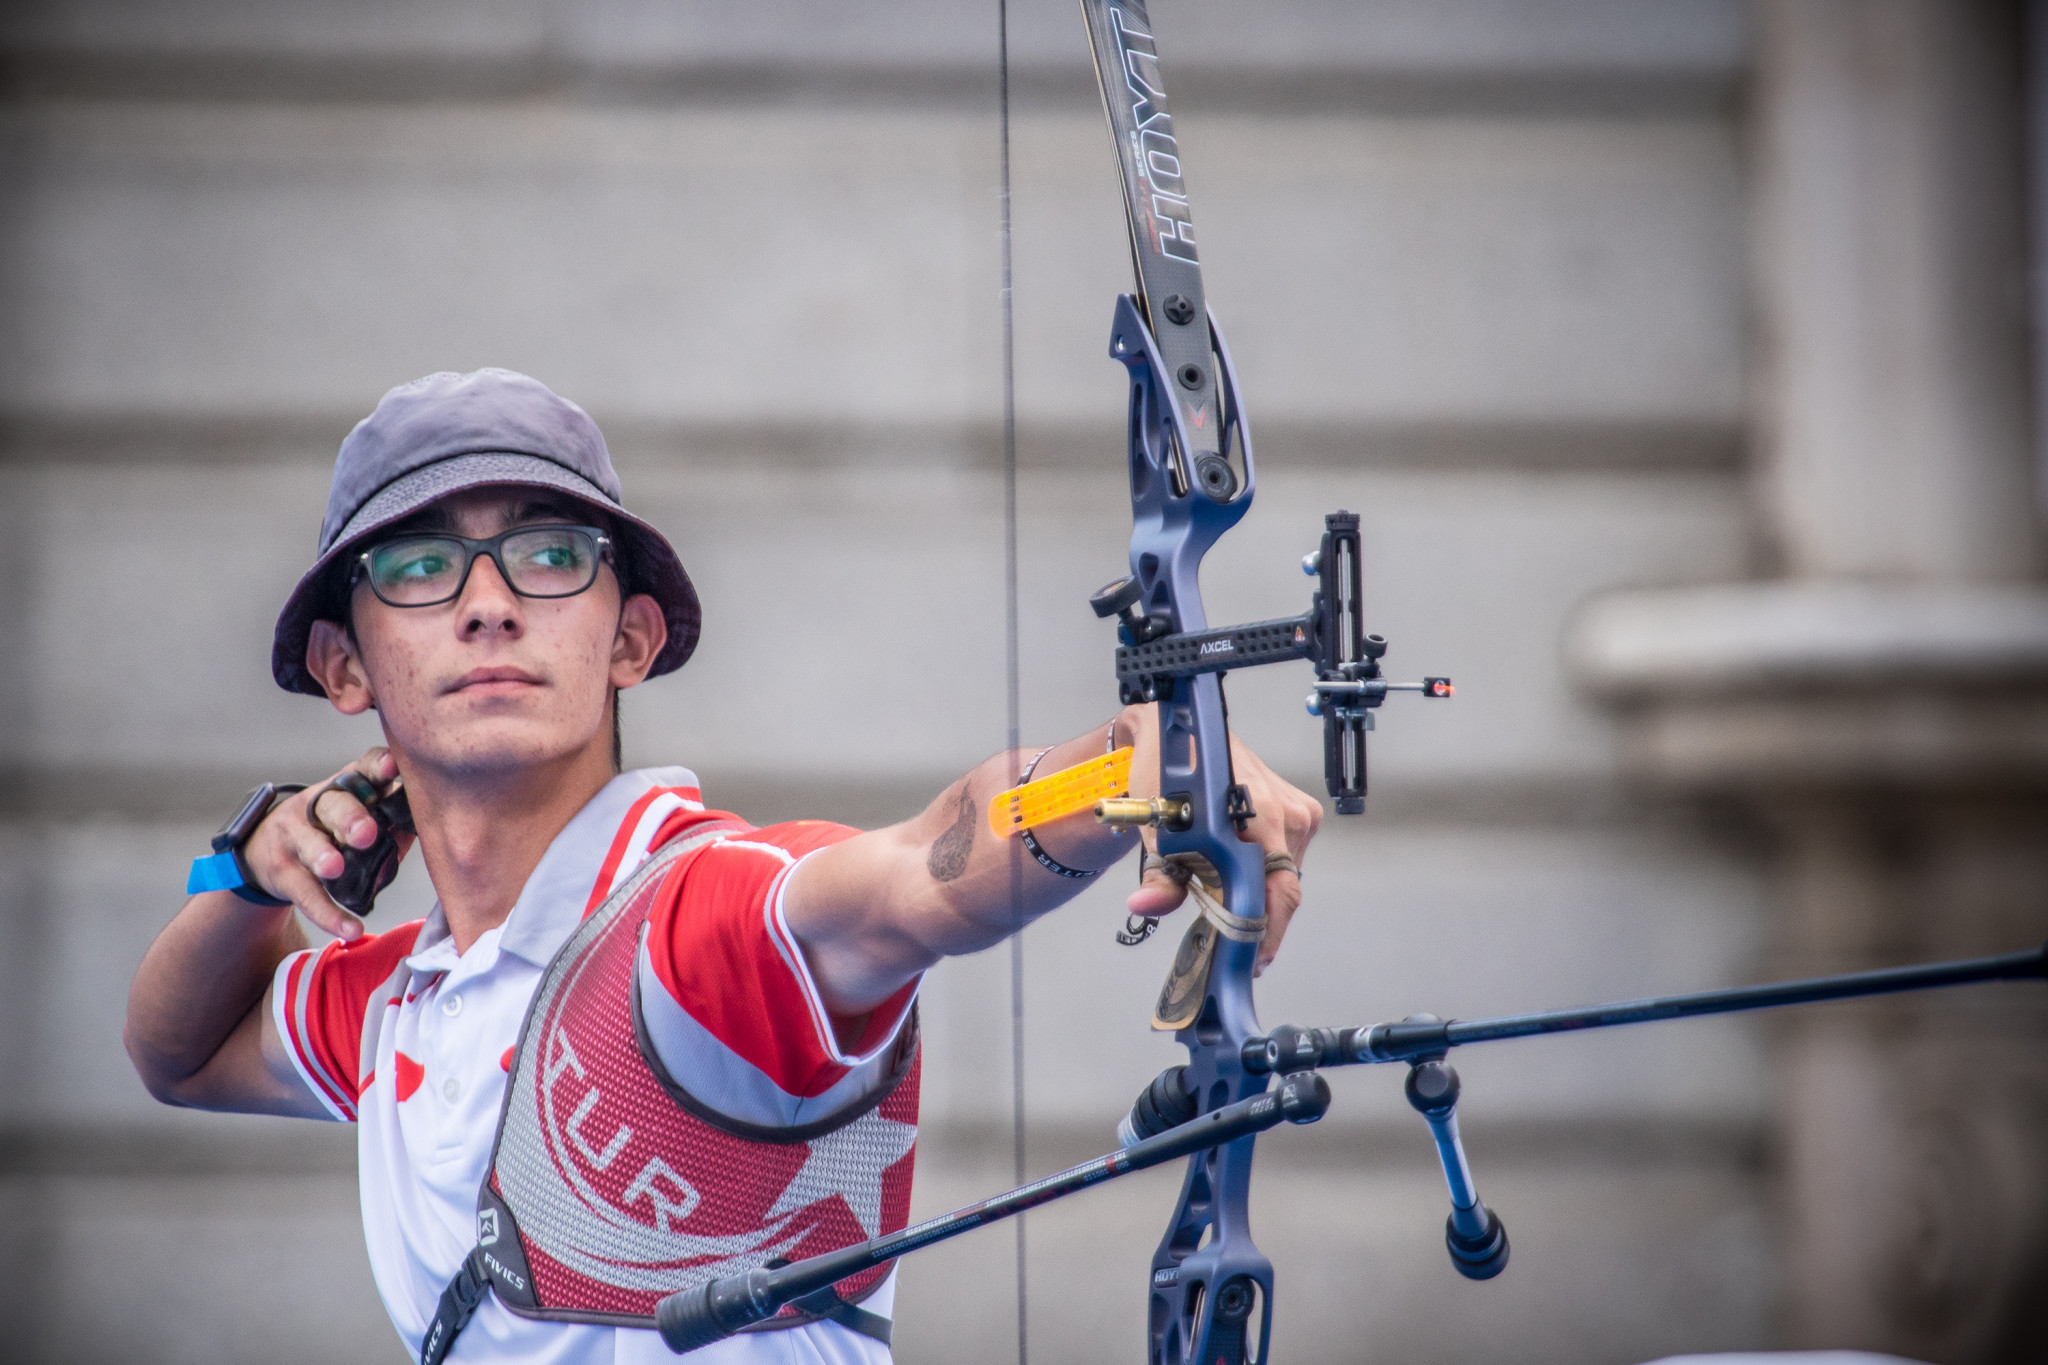 Paris to host third stage of Archery World Cup season